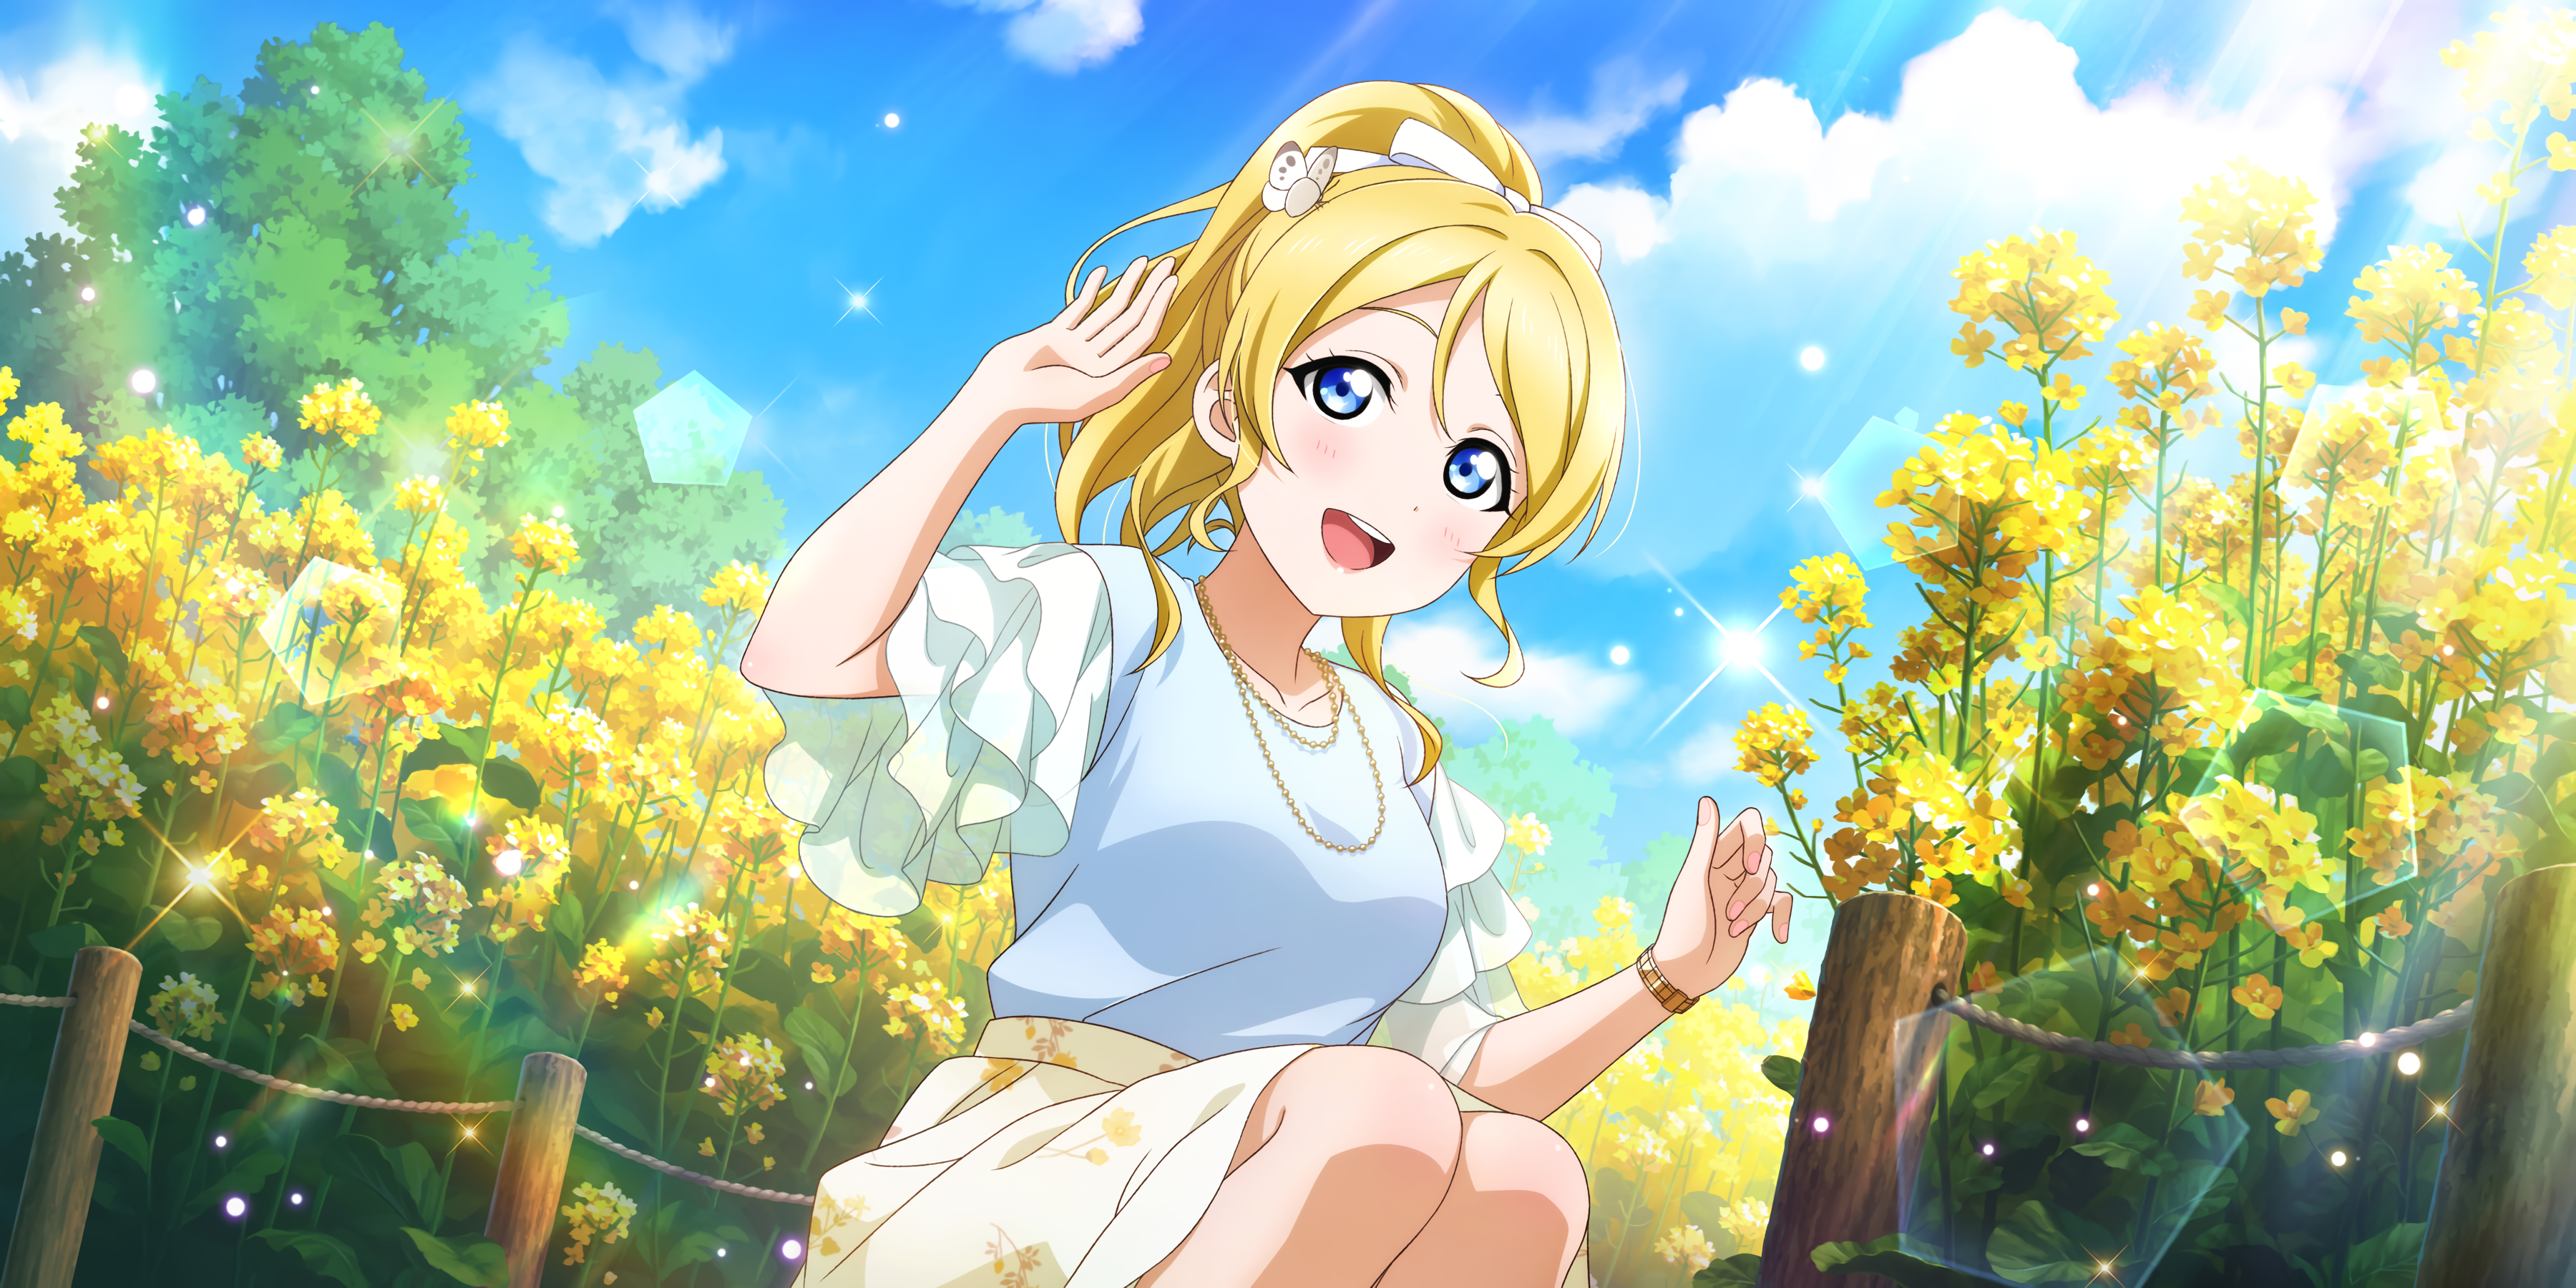 Ayase Eli Love Live Outdoors Yellow Flowers Trees Sparkles Clear Sky Clouds Blonde Blue Eyes Blush A 3600x1800